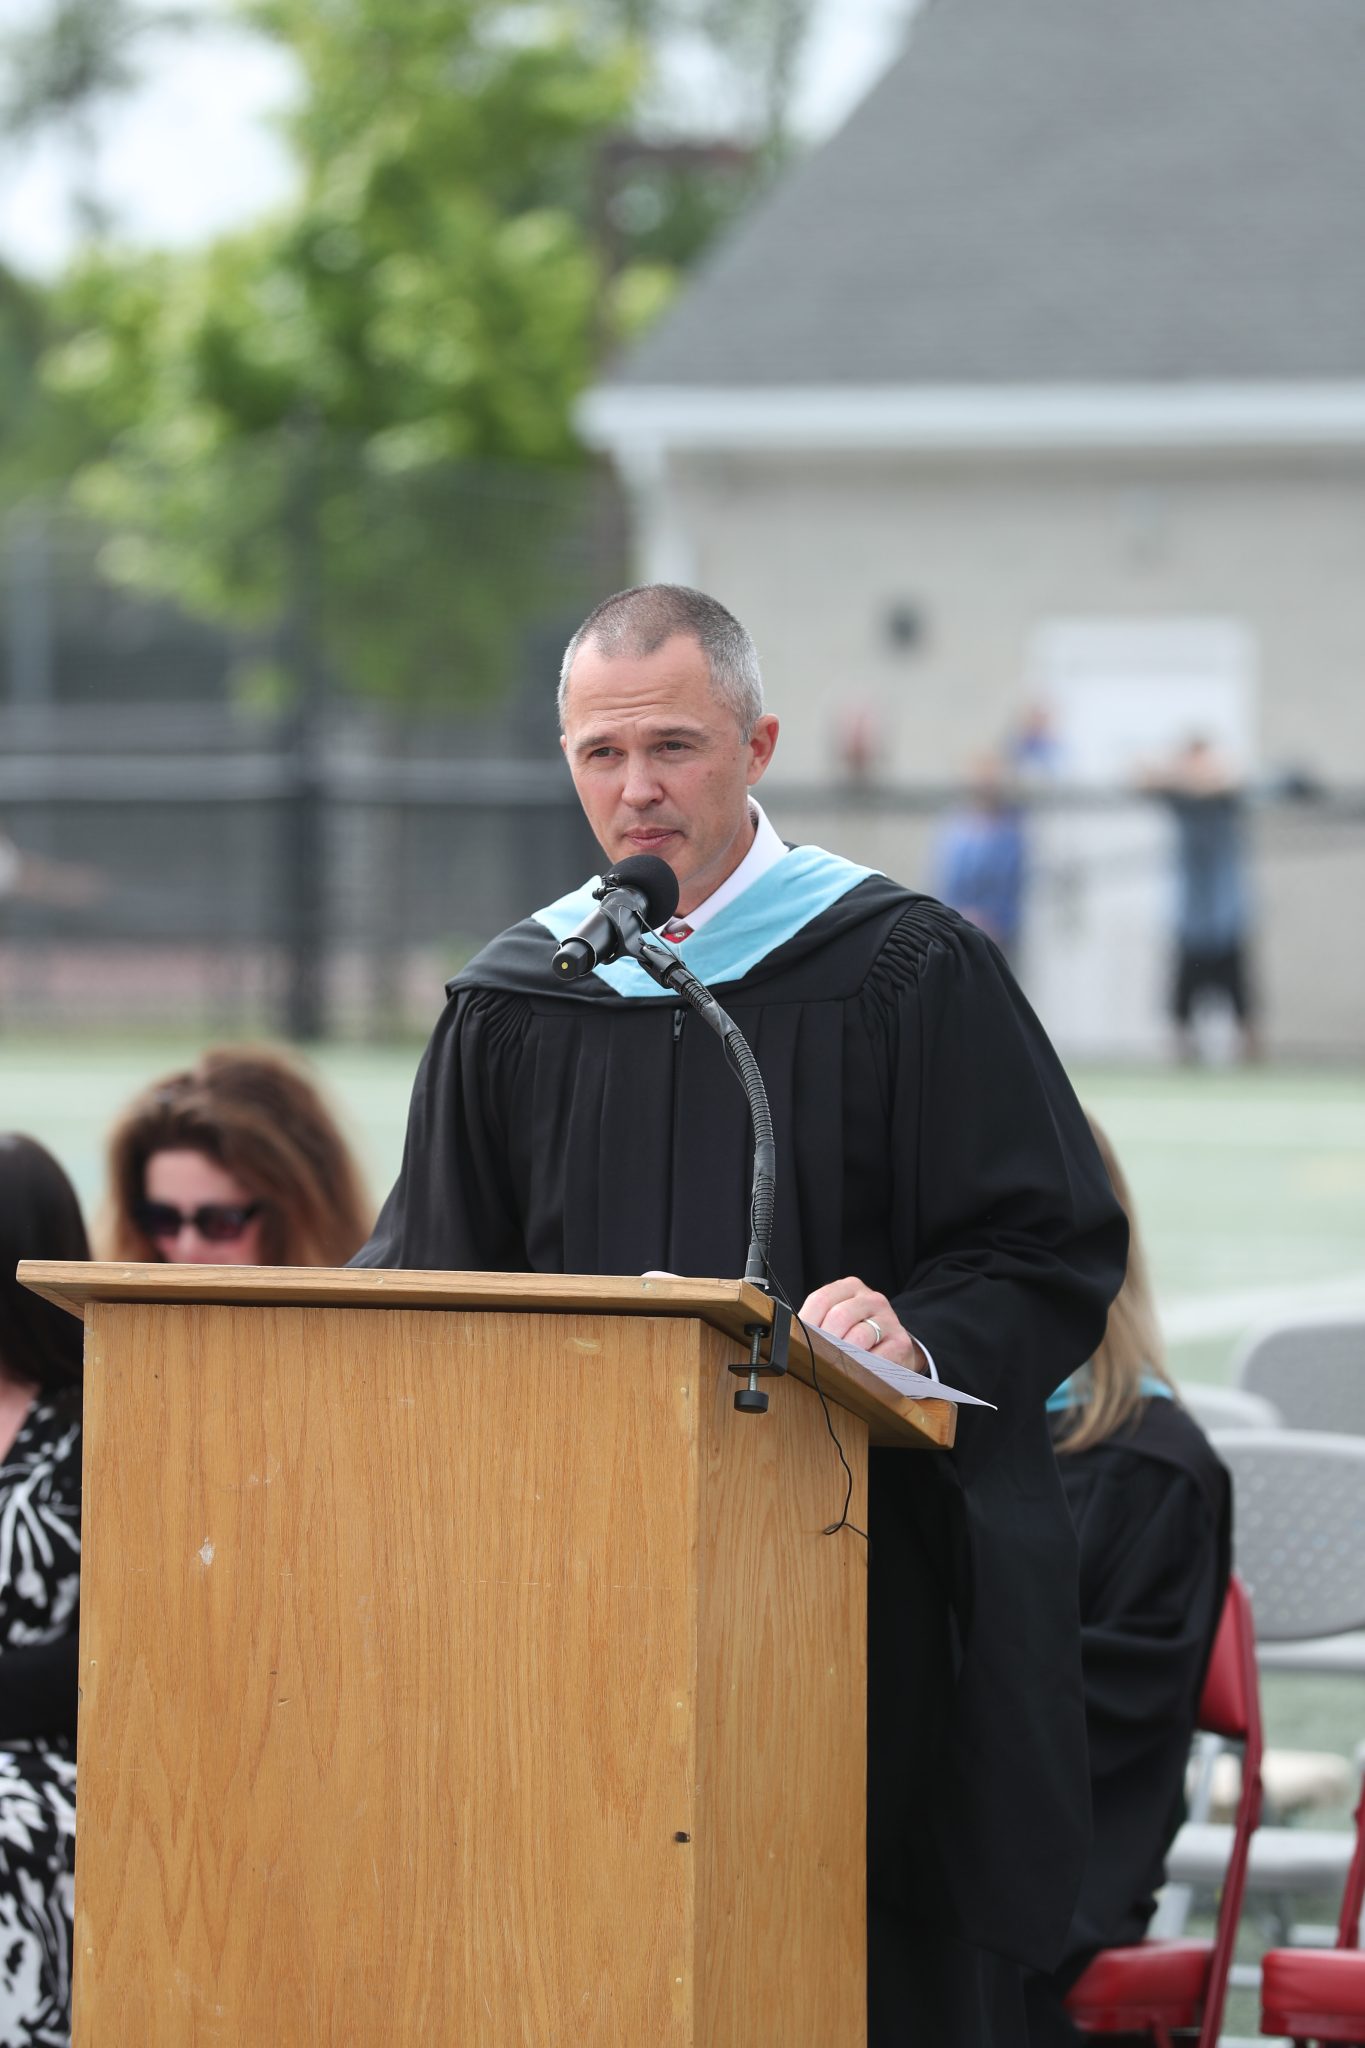 Principal Rick Swanson gave the opening remarks.